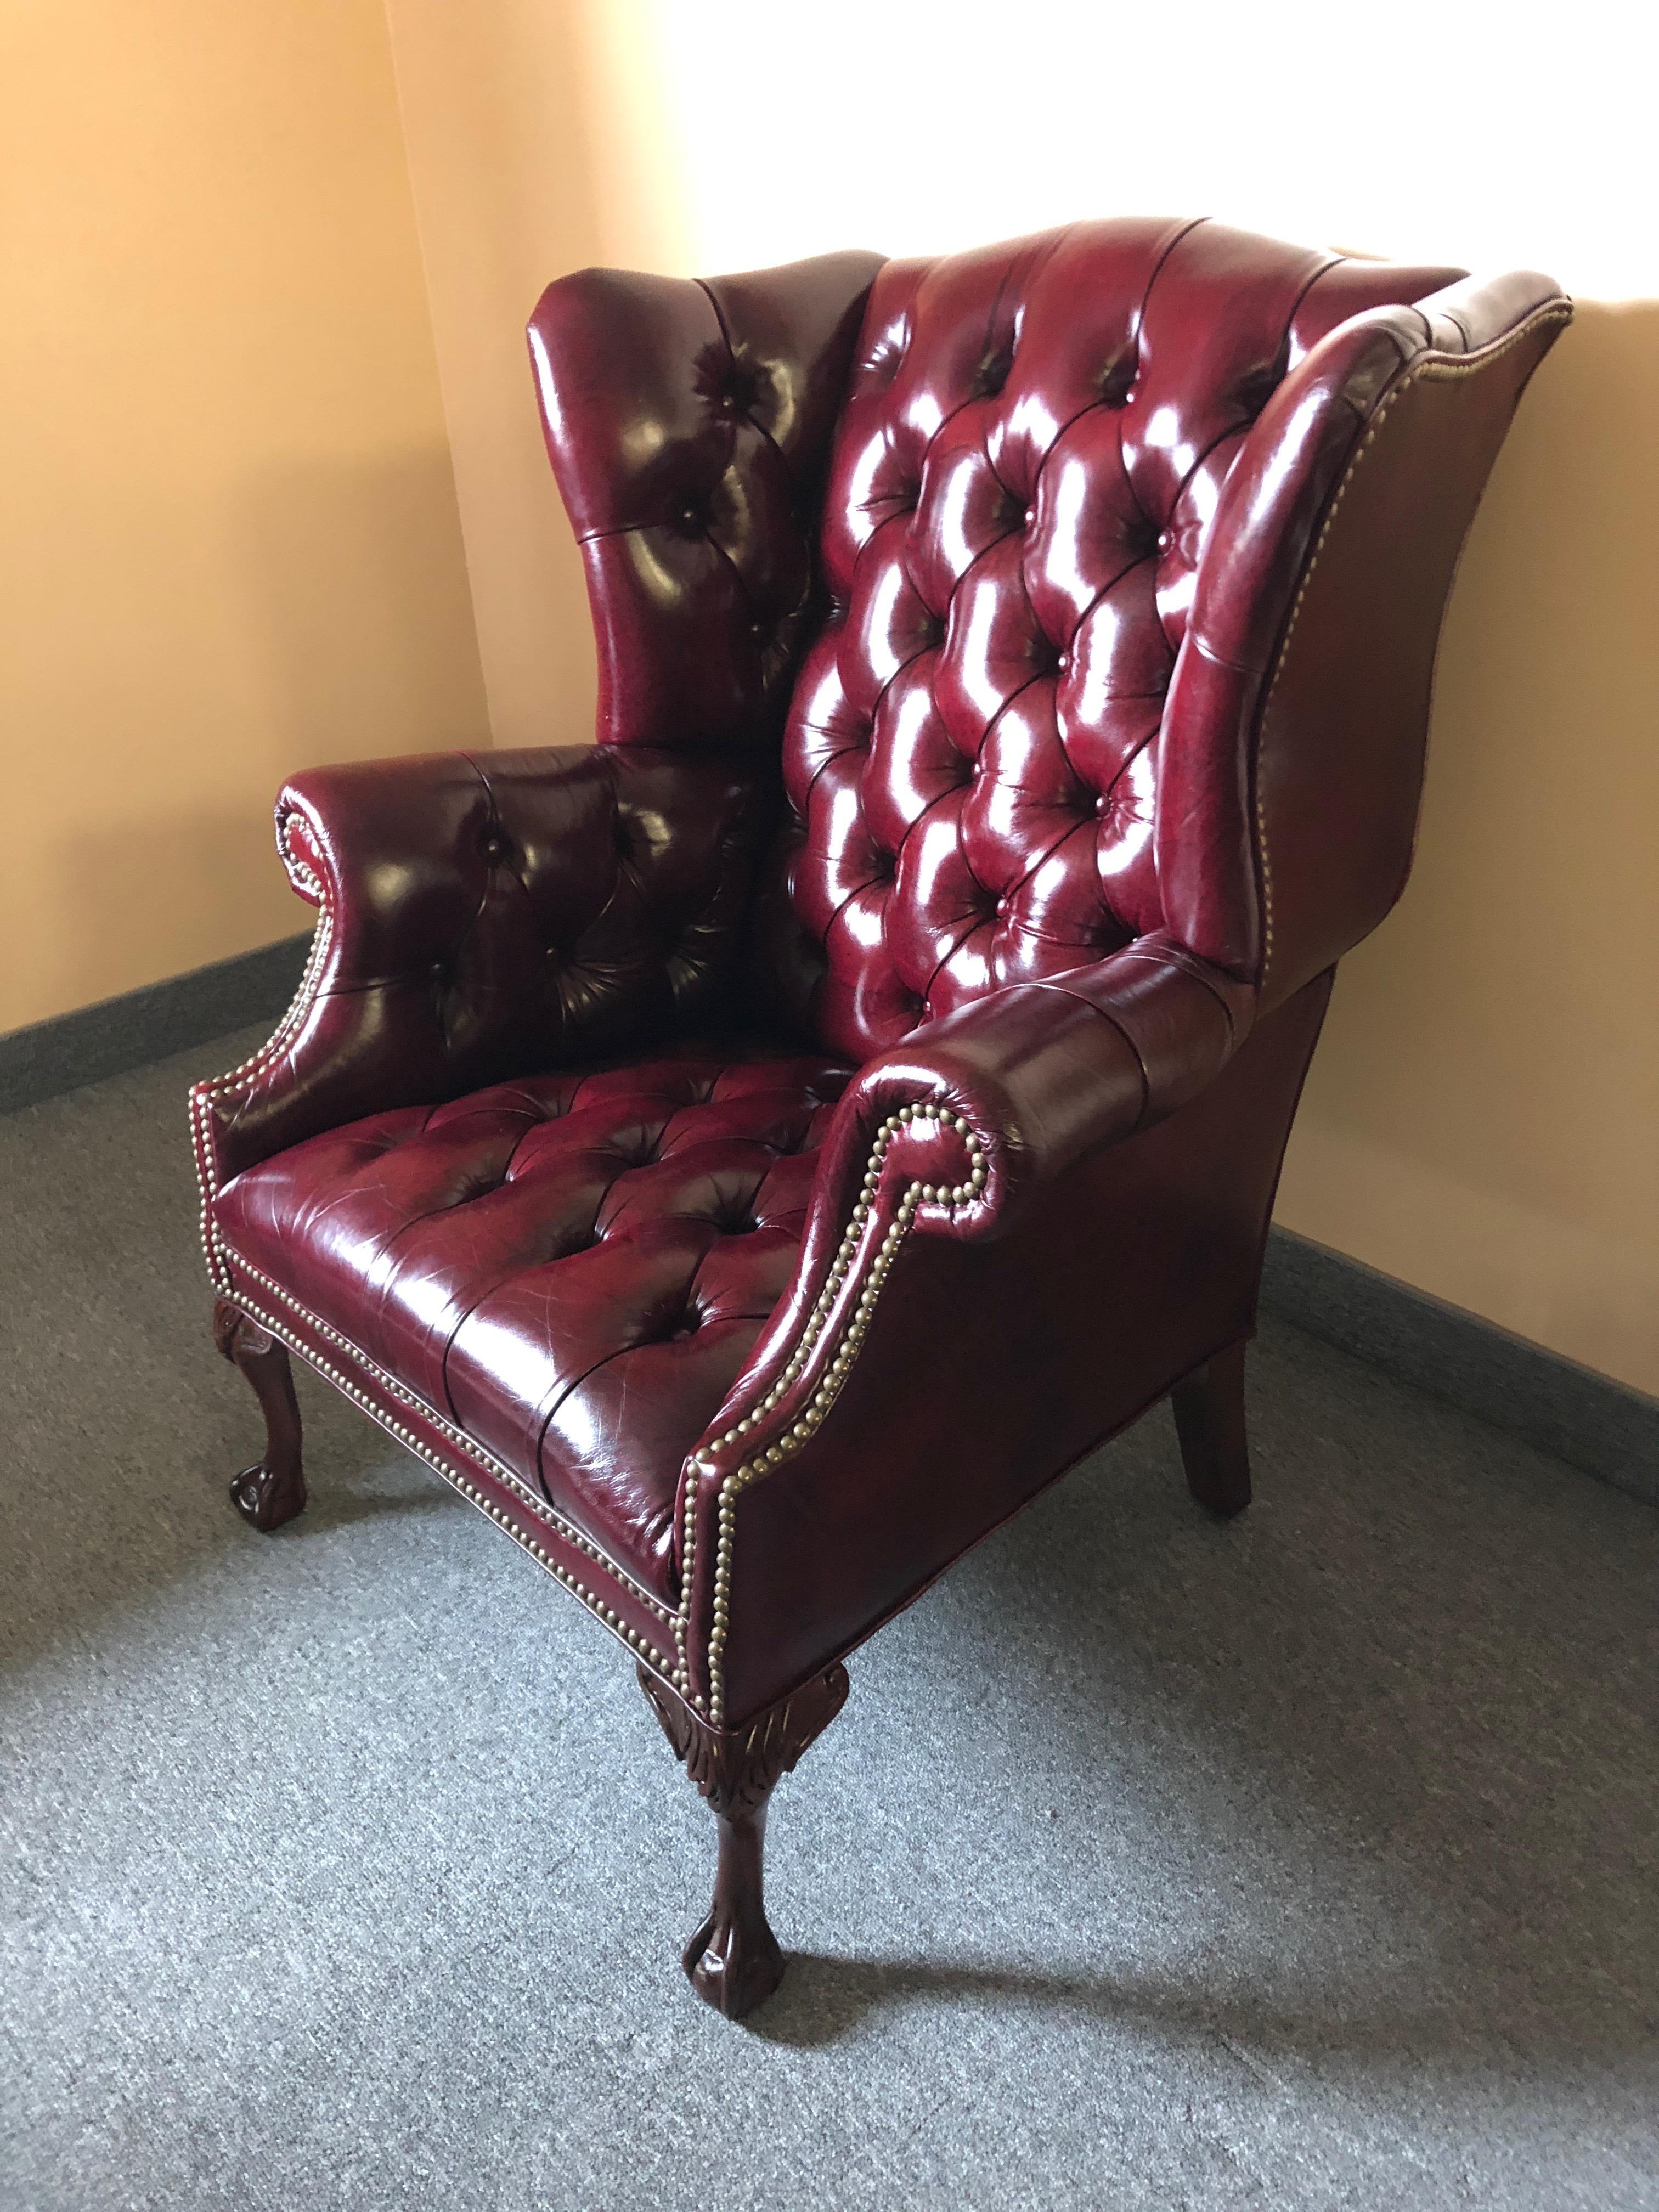 Pair of Rich Burgundy Leather Vintage Tufted Chesterfield Wing Chairs 2